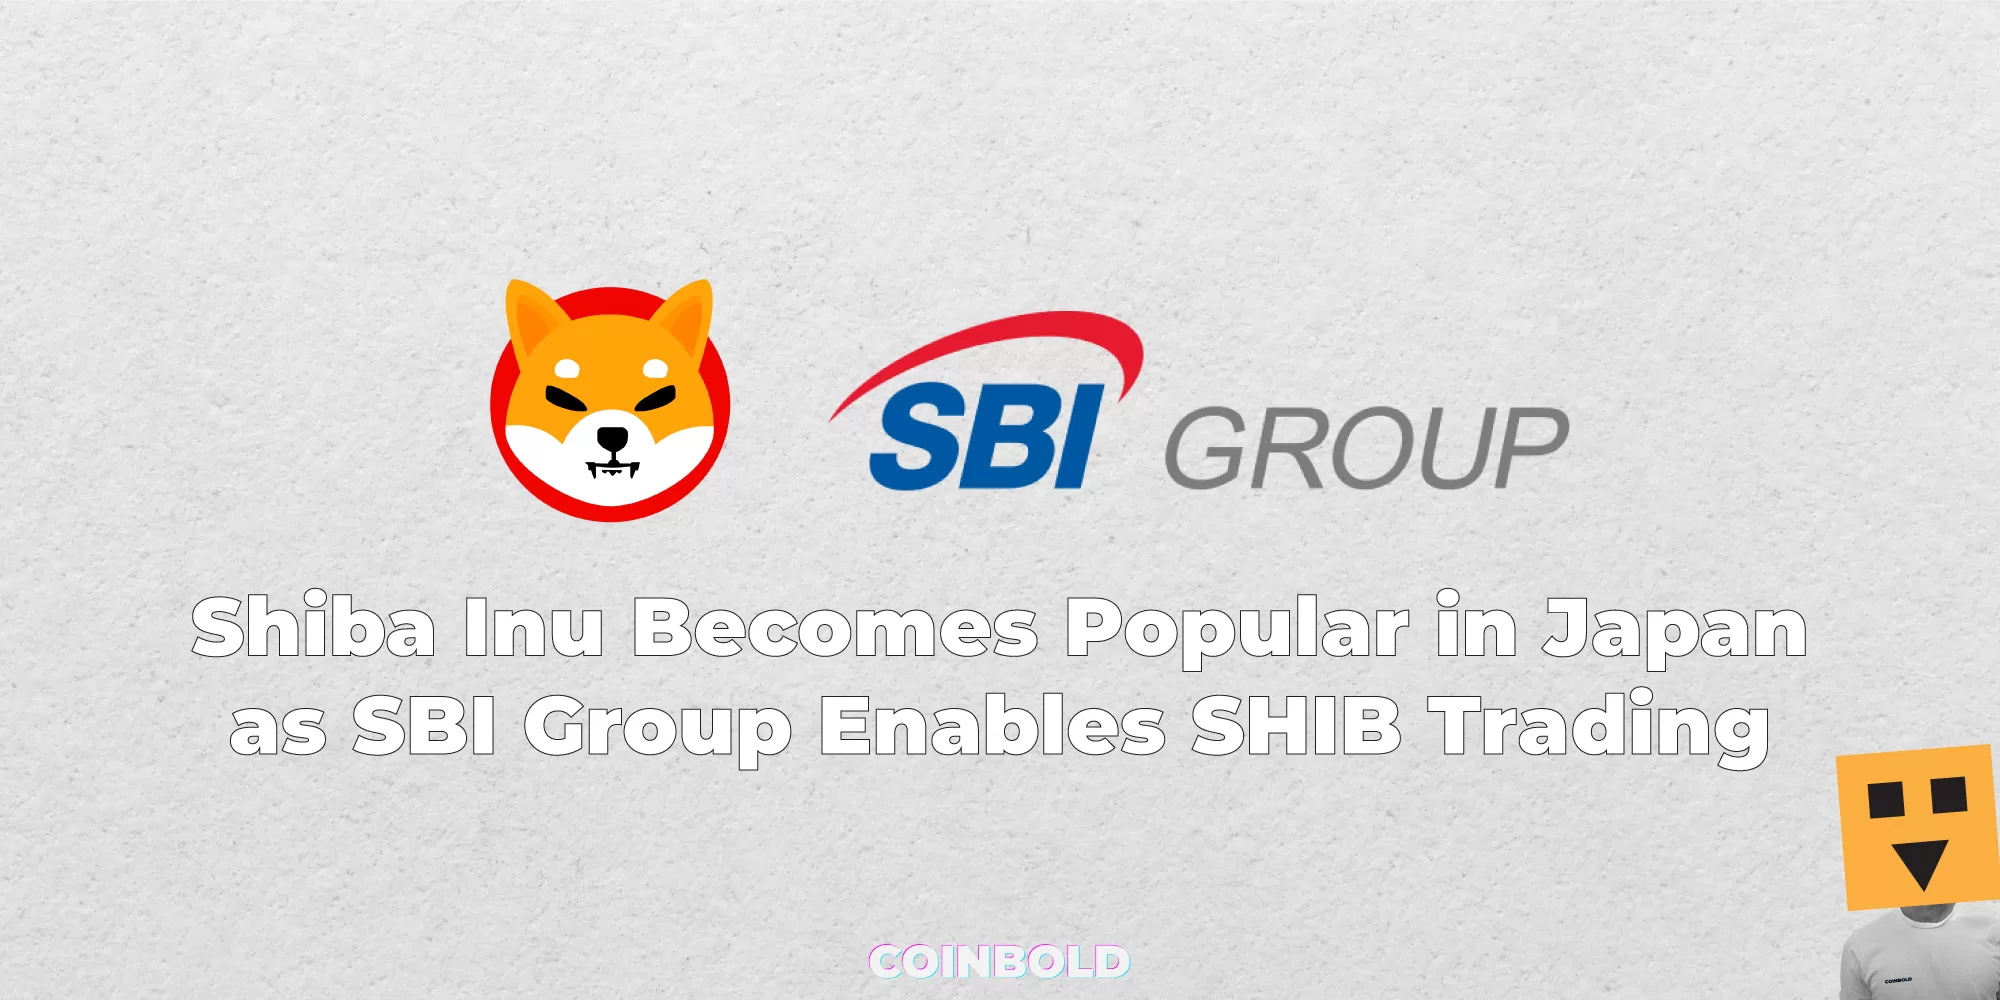 Shiba Inu Becomes Popular in Japan as SBI Group Enables SHIB Trading